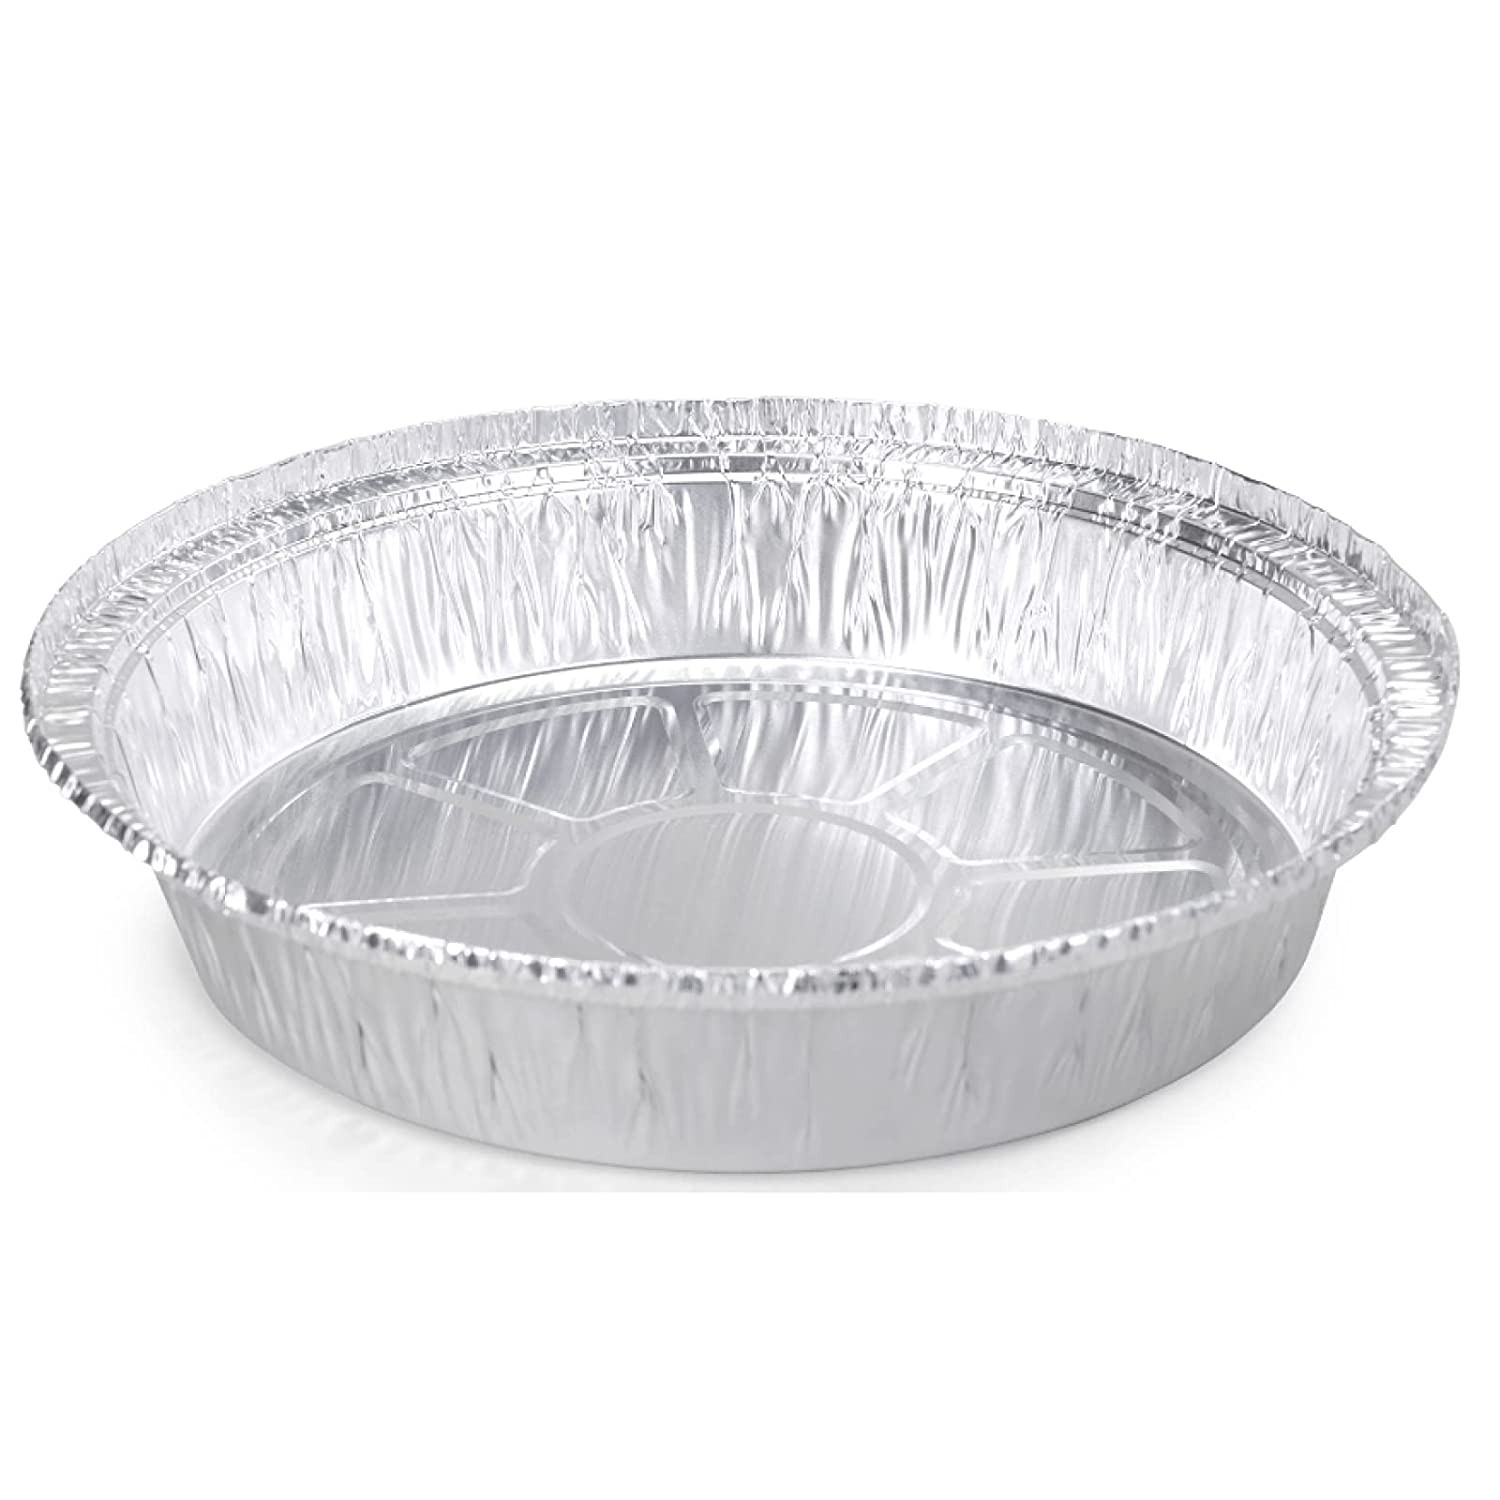 https://idlpack.com/image/cache/catalog/Products/Foil%20Pans%20and%20Trays/61mf7dSw-HS._SL1500_-1500x1500.jpg